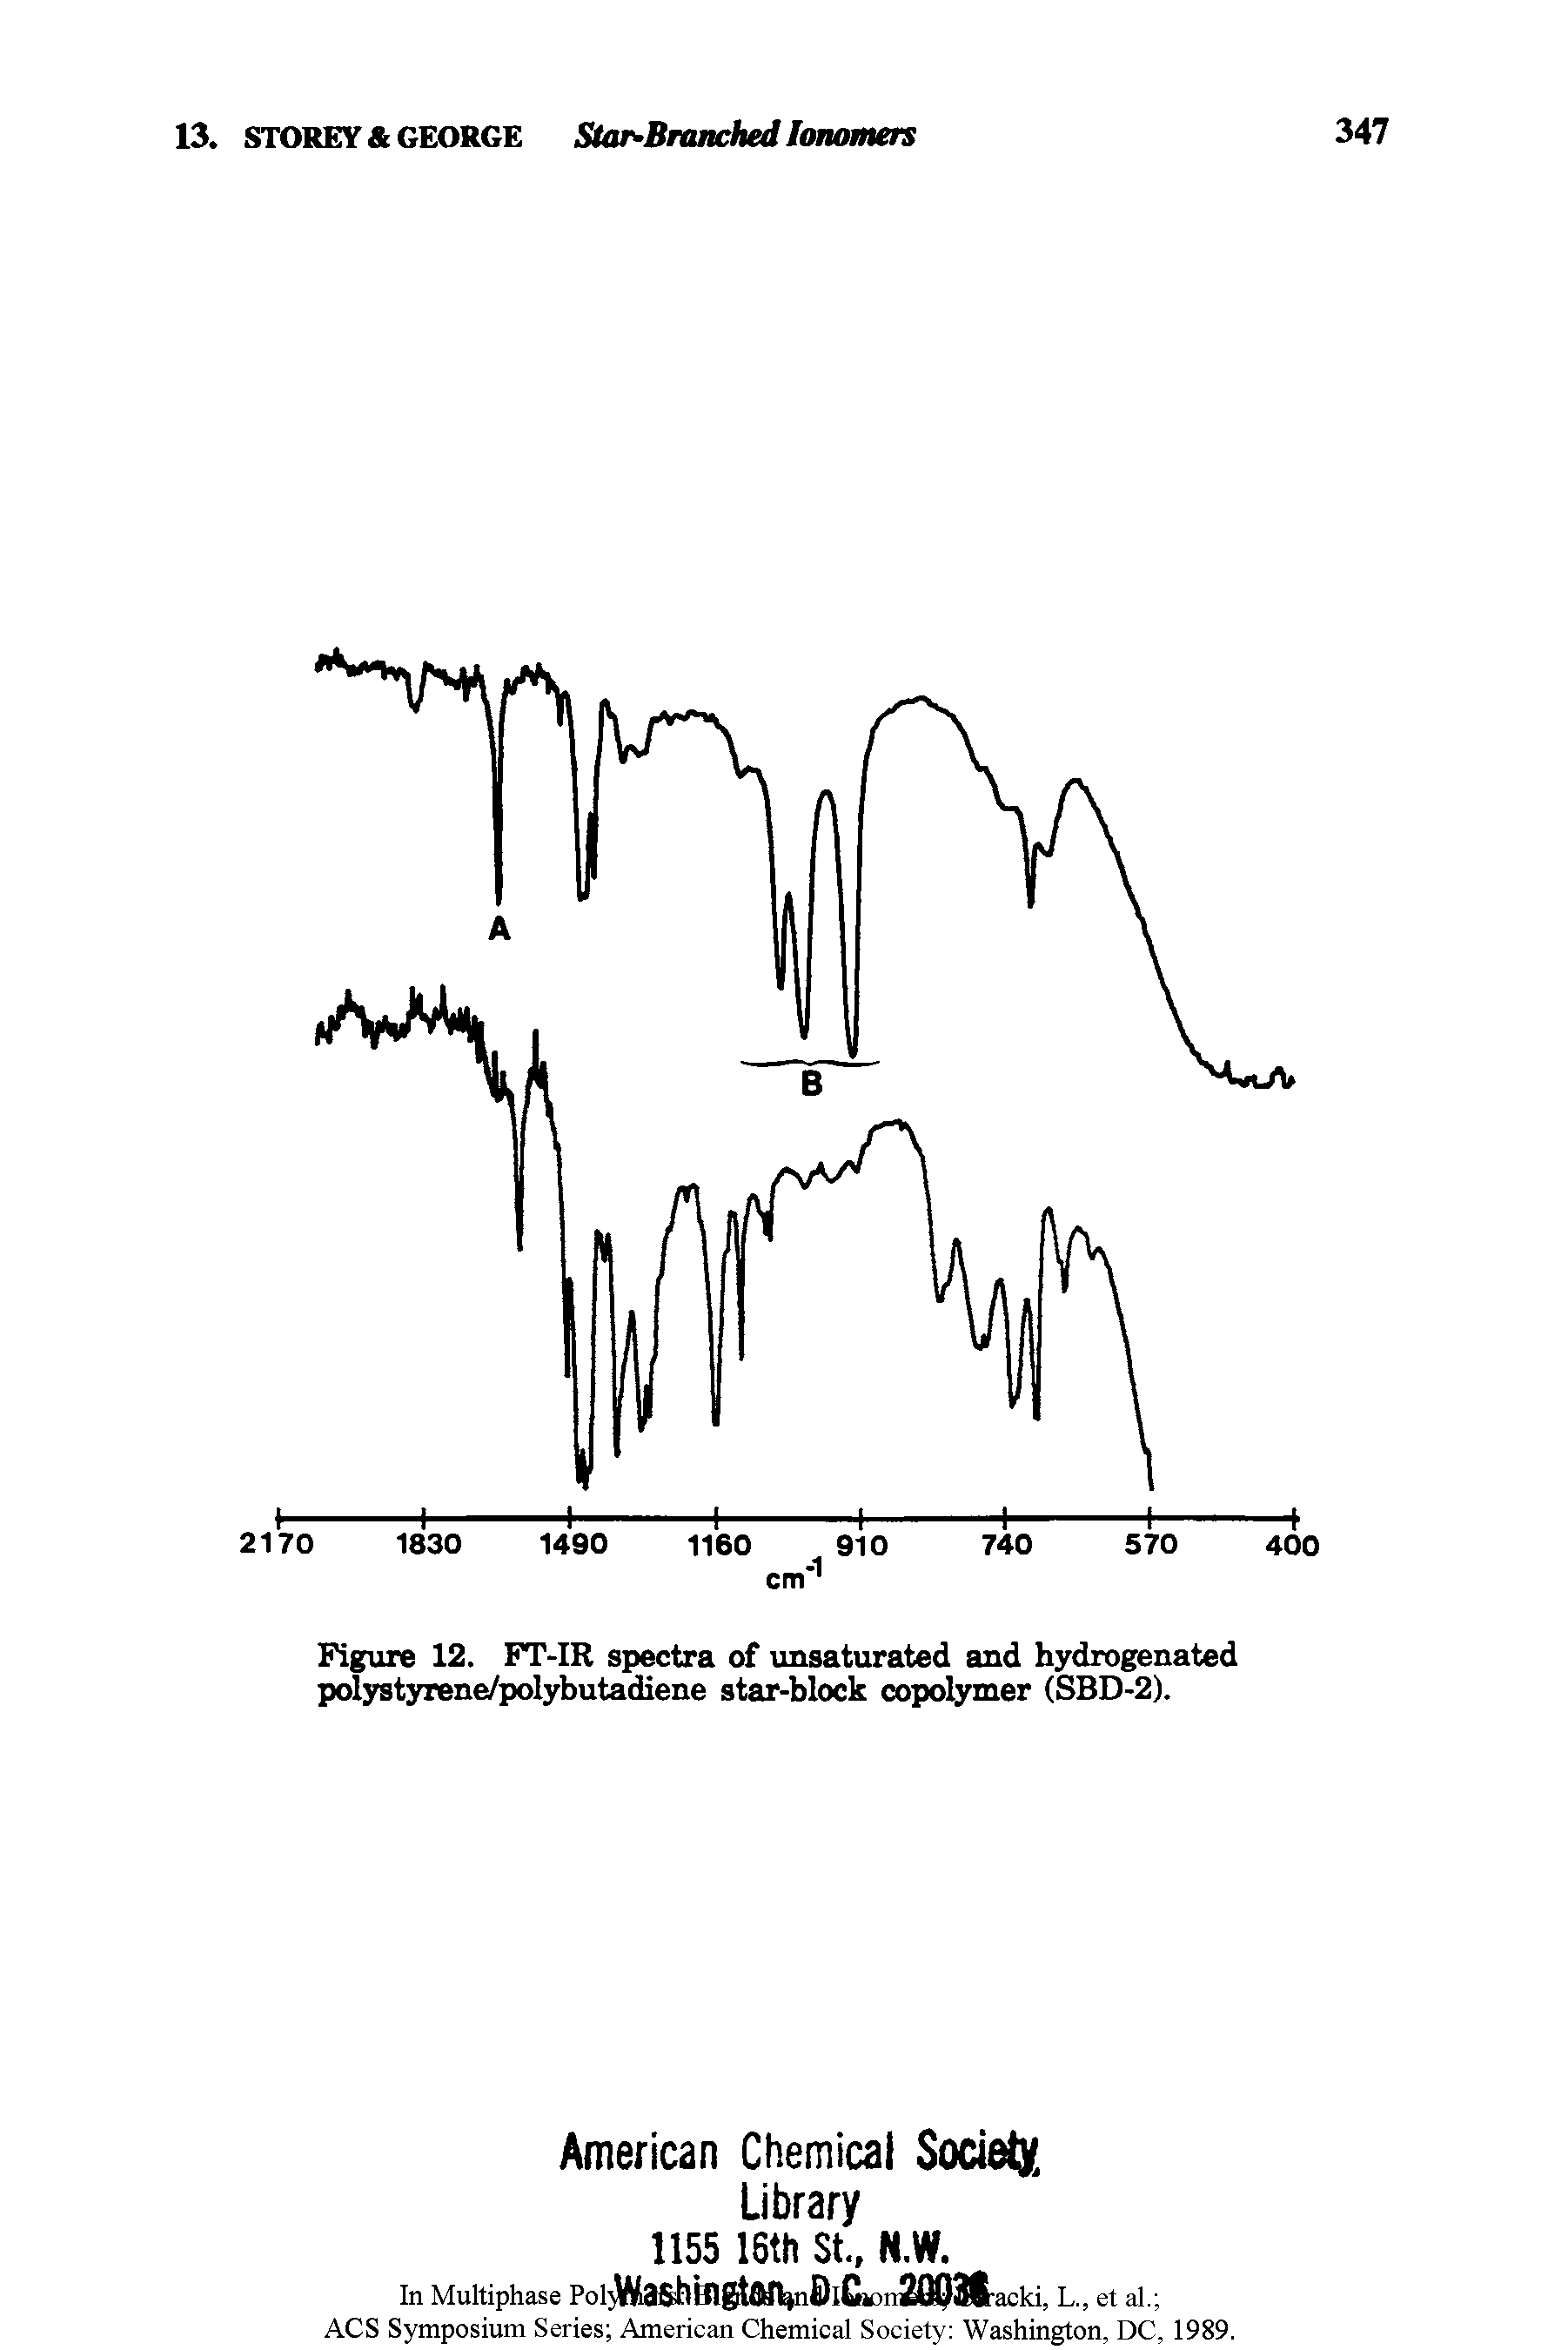 Figure 12. FT-IR spectra of unsaturated and hydrogenated polystyrene/polybutadiene star-block copolymer (SBD-2).